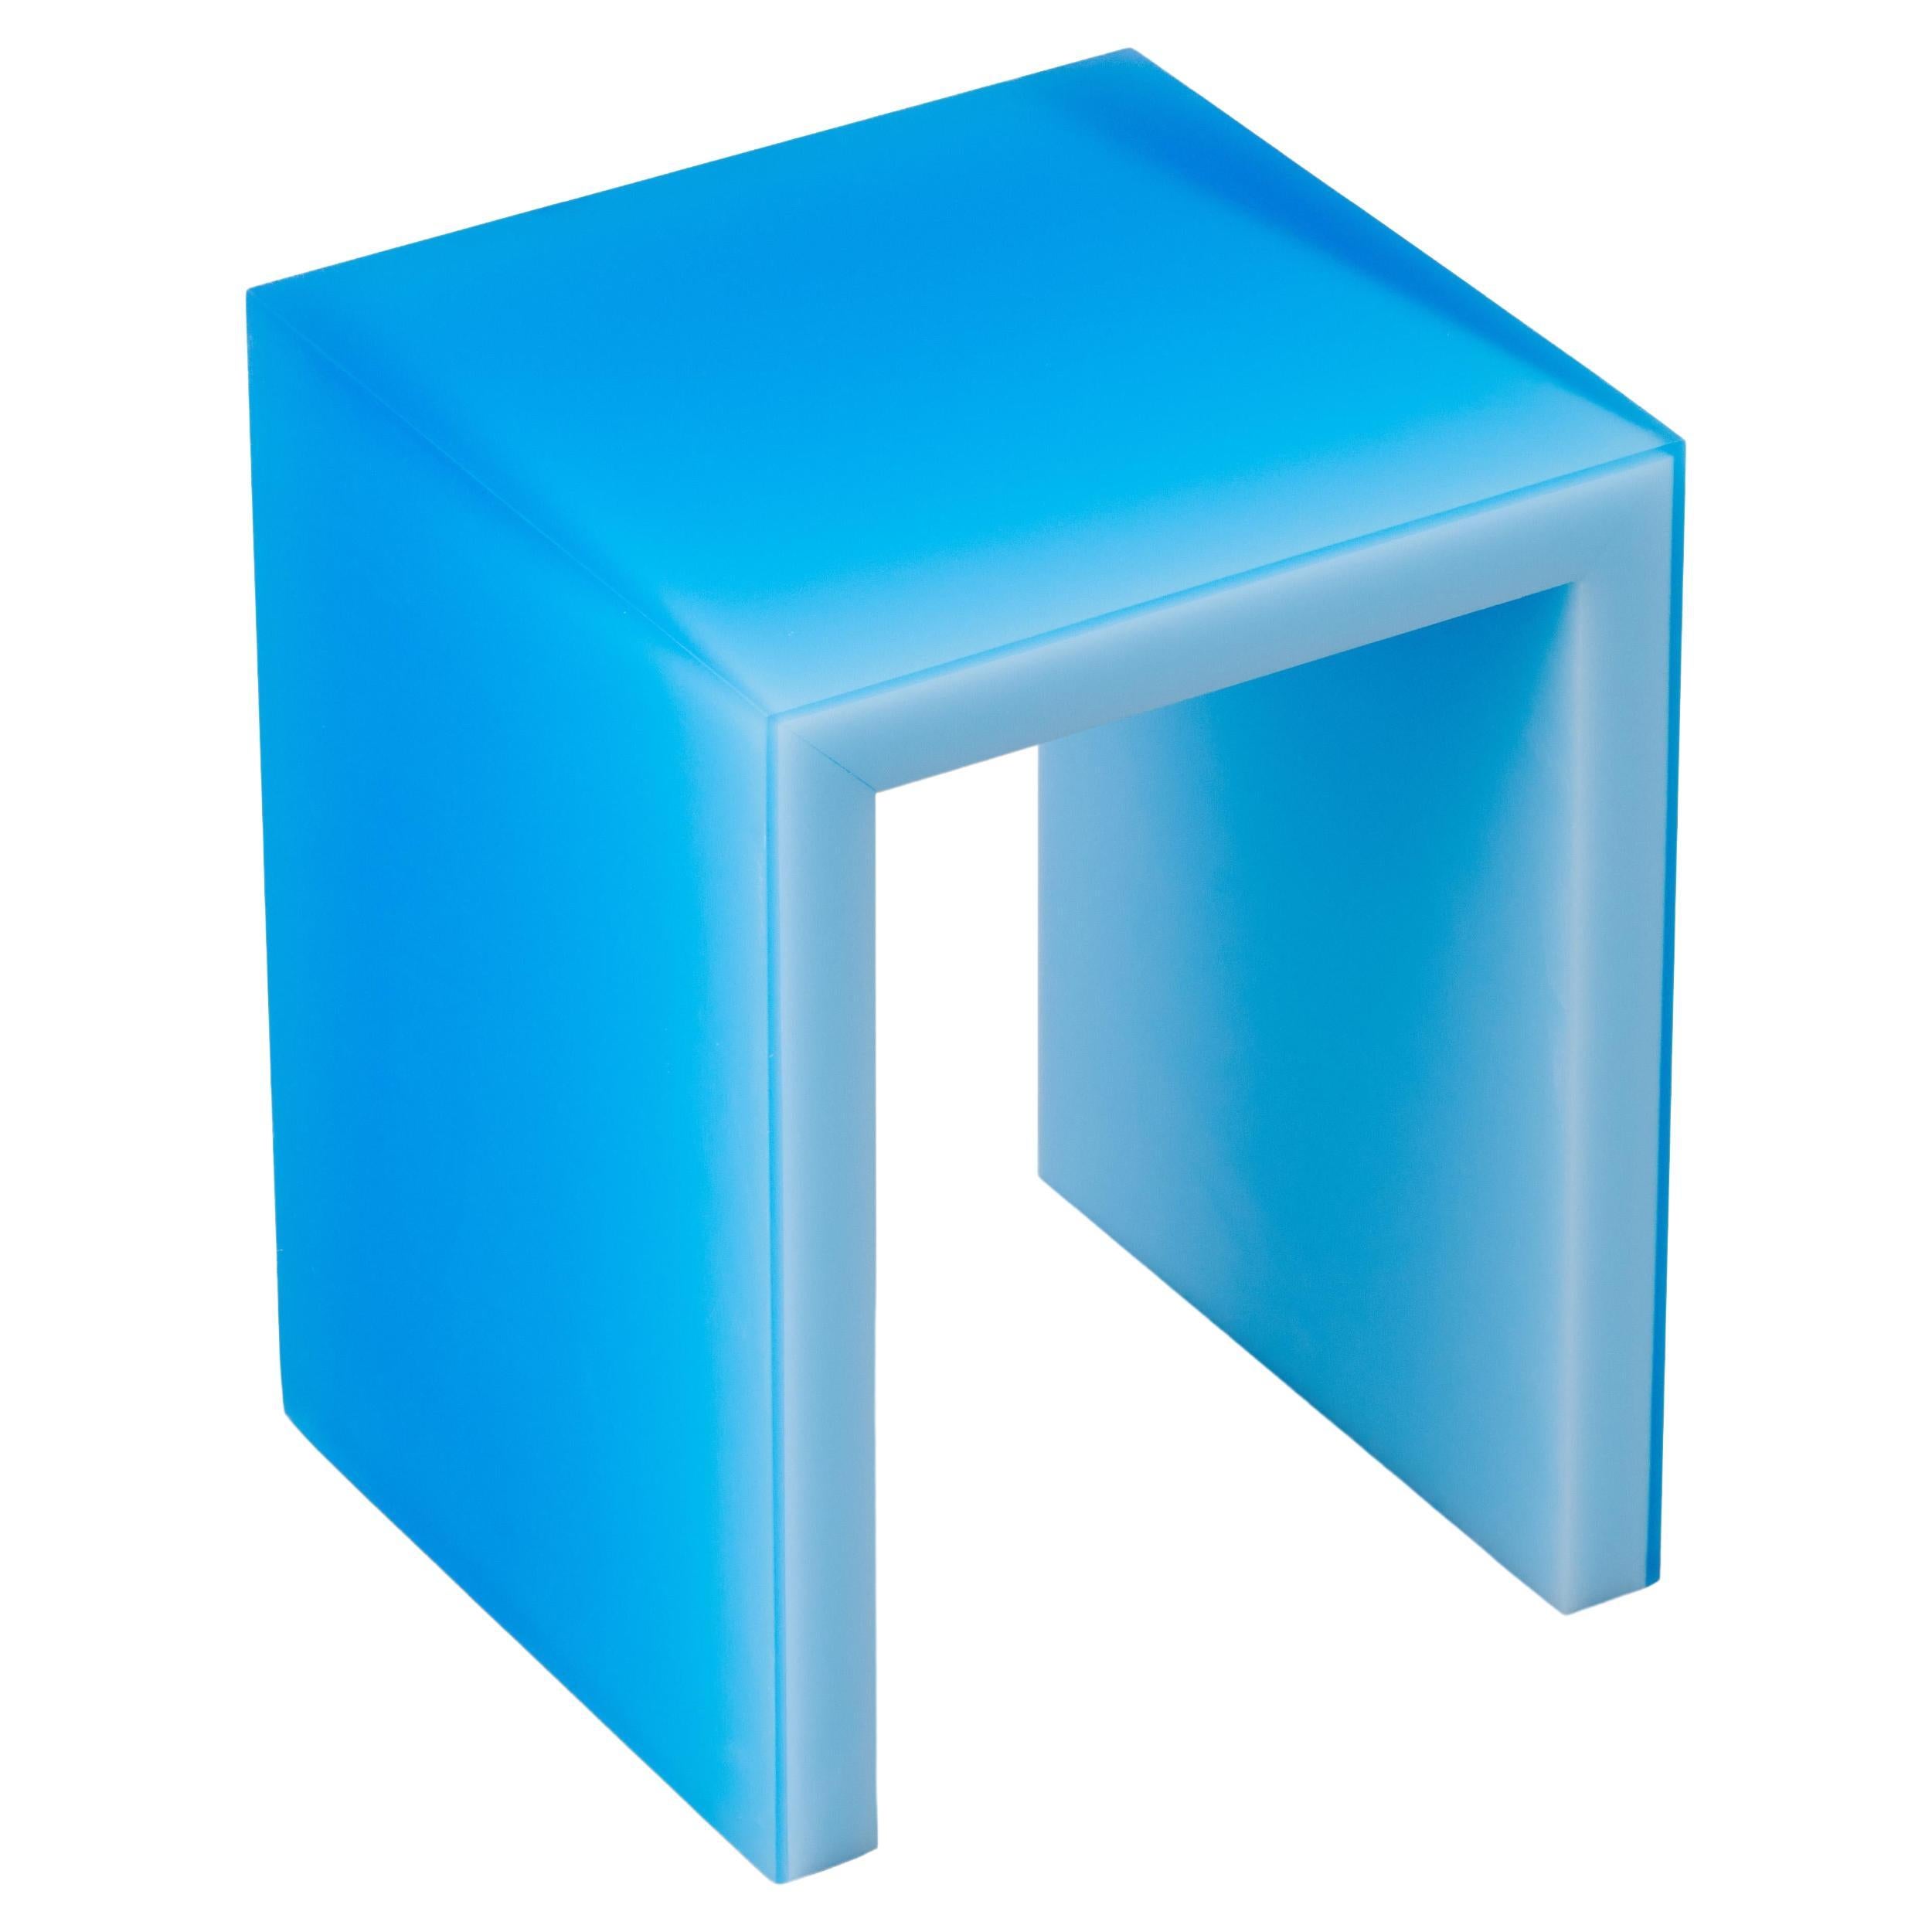 Pure Shift Resin Side Table/Stool in Blue by Facture, REP by Tuleste Factory For Sale